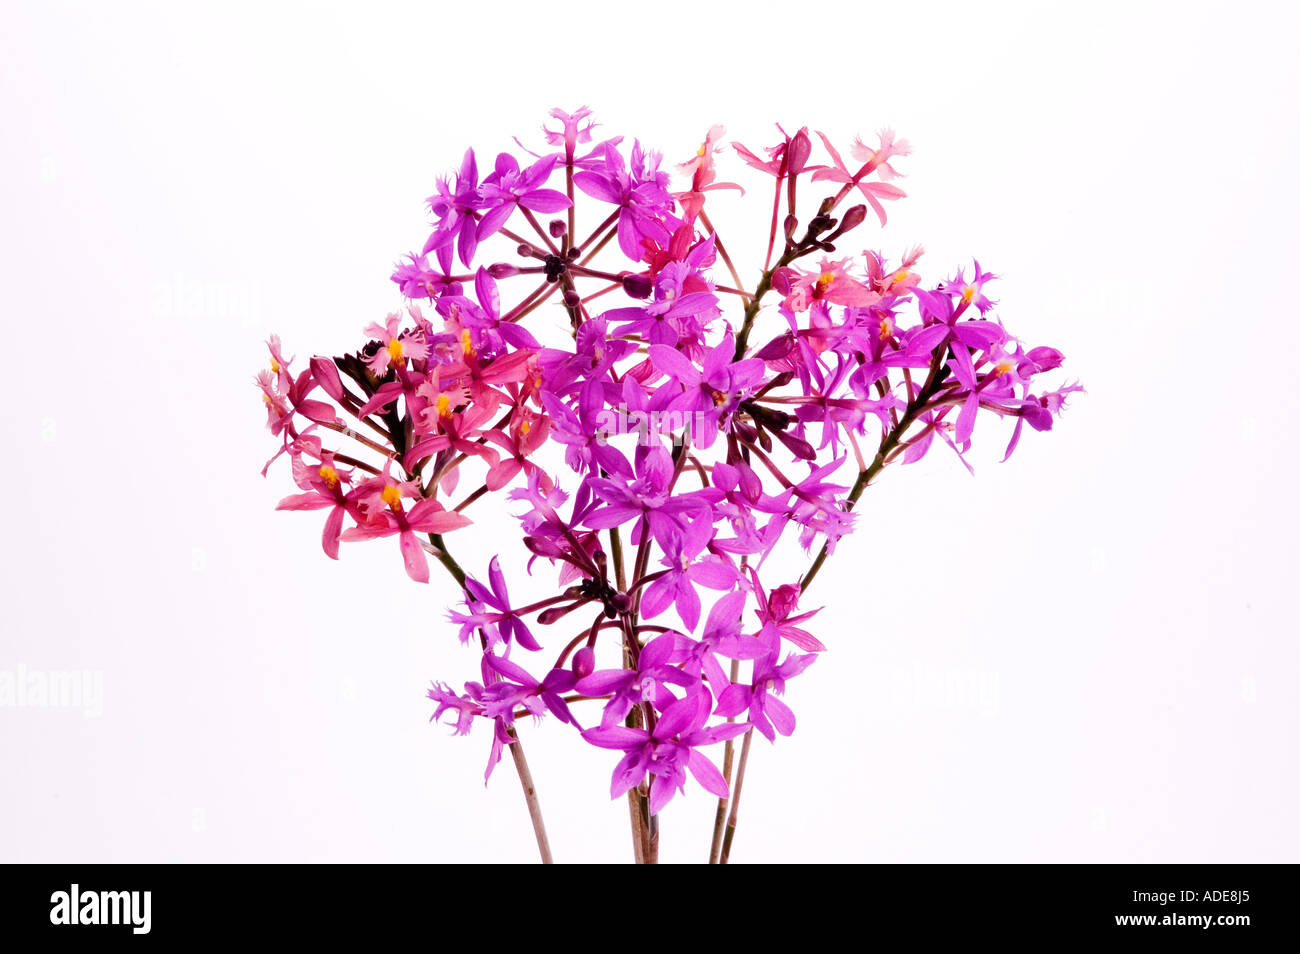 Stock photograph of a bunch of mauve crucifix orchids Epidendrum radicans DSC 9350 Stock Photo